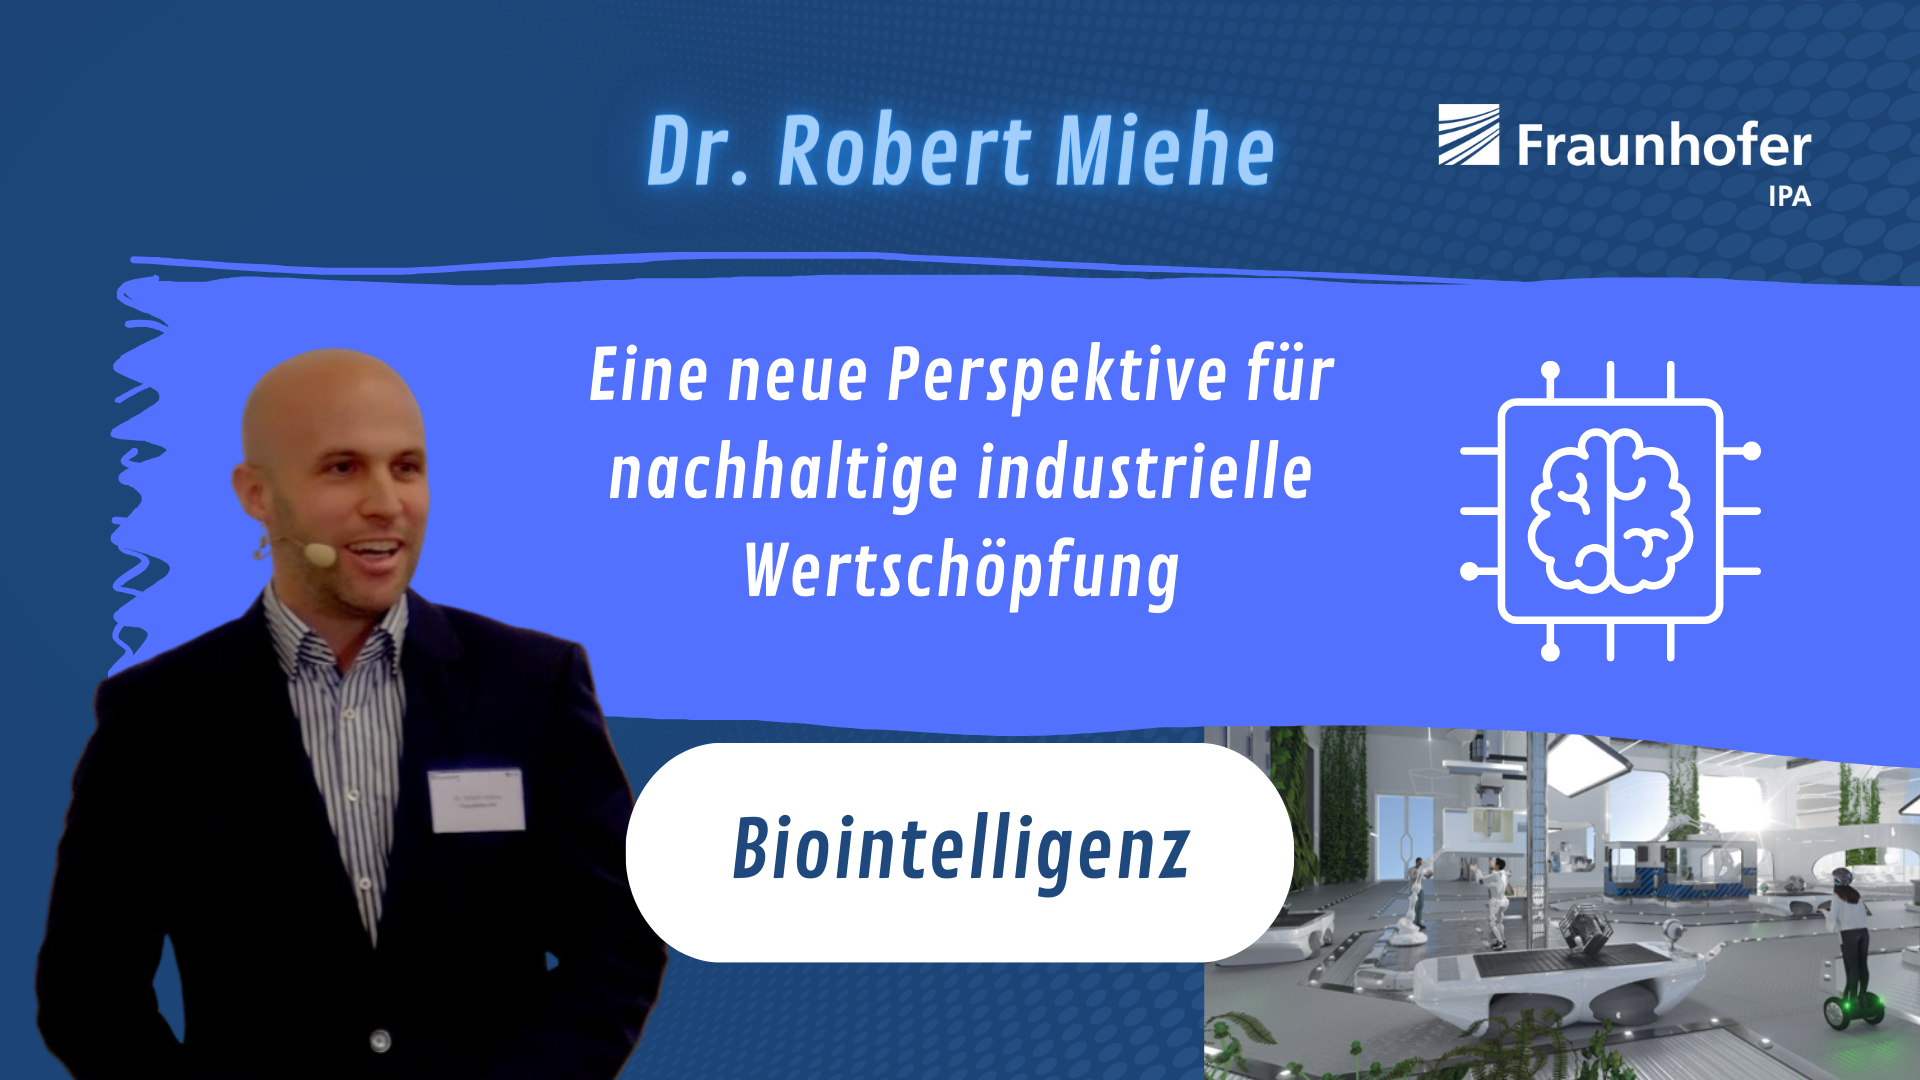 GREEN - Biointelligence with Dr. Robert Miehe